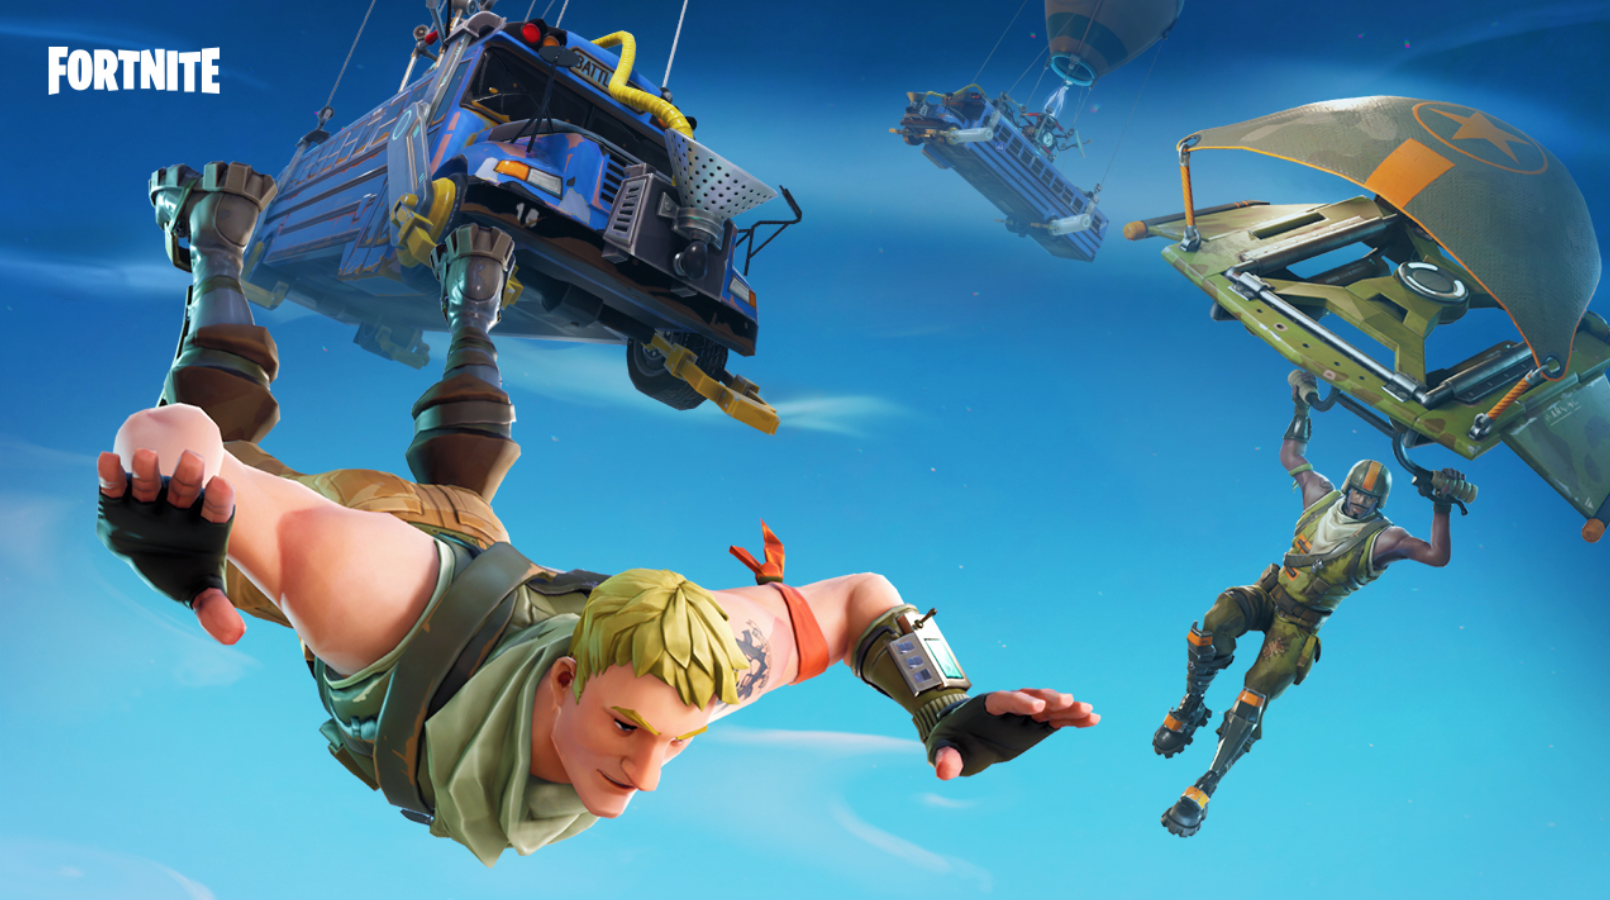 fortnite playground mode still delayed but 2 new modes could arrive soon - when is fortnite playground mode coming out